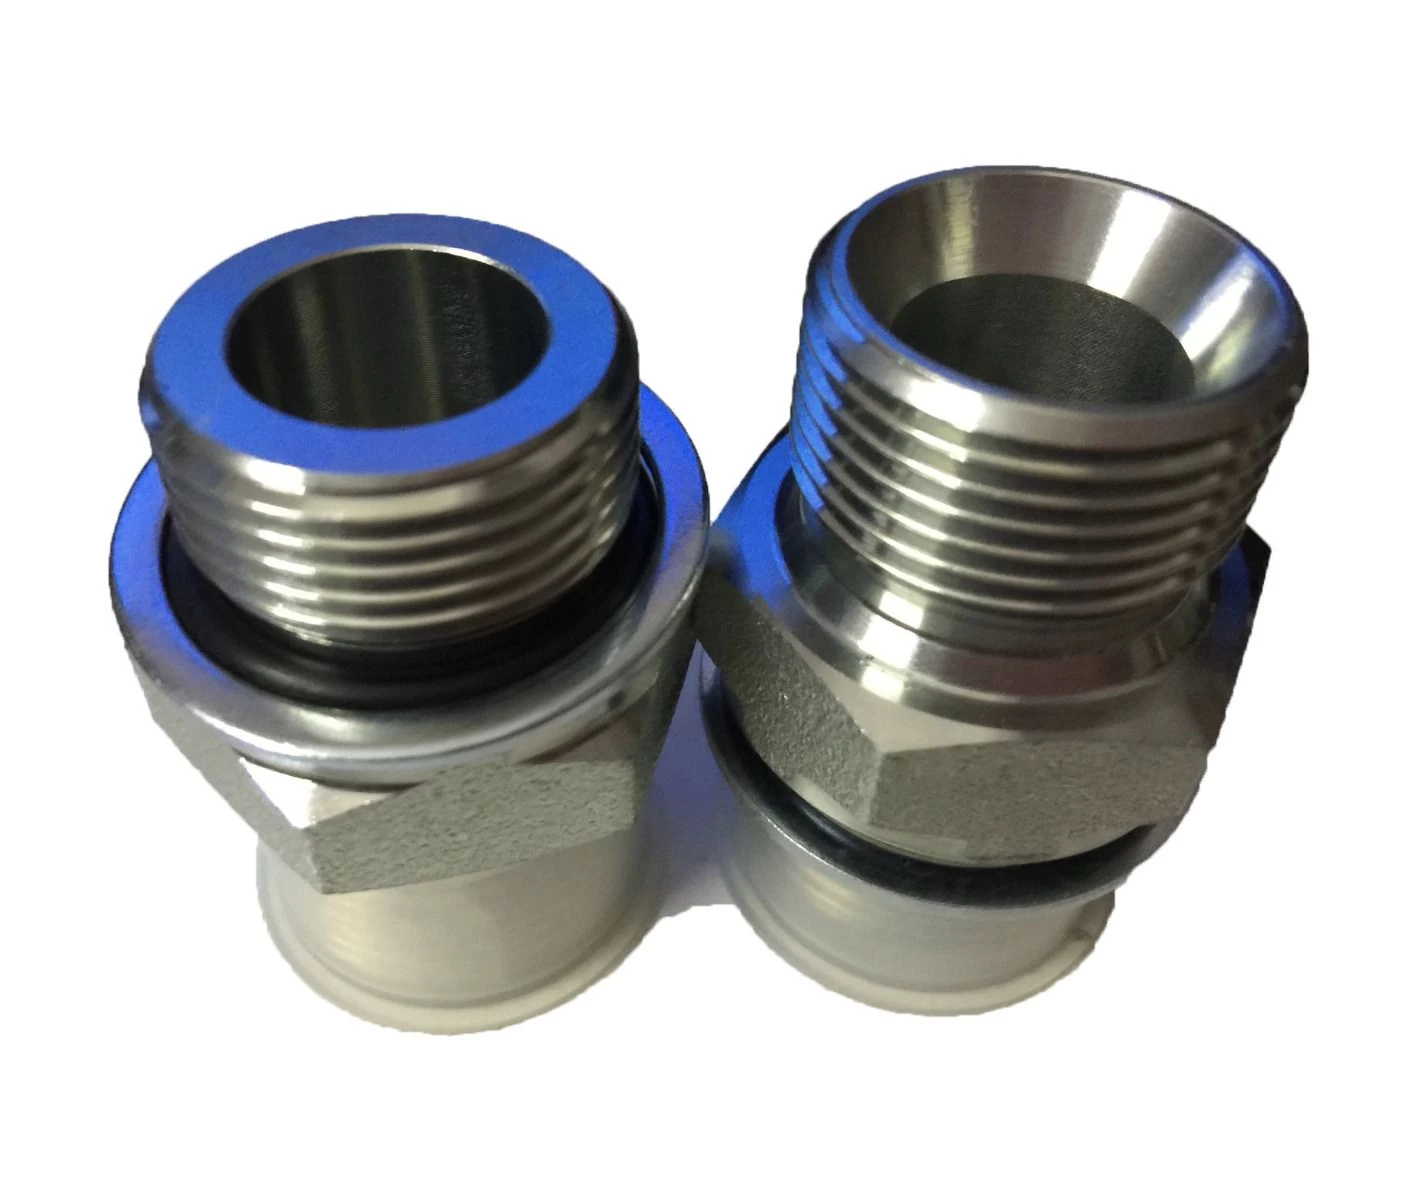 Cina 1CG BSP Thread stud ends with O-Ring Sealing produttore